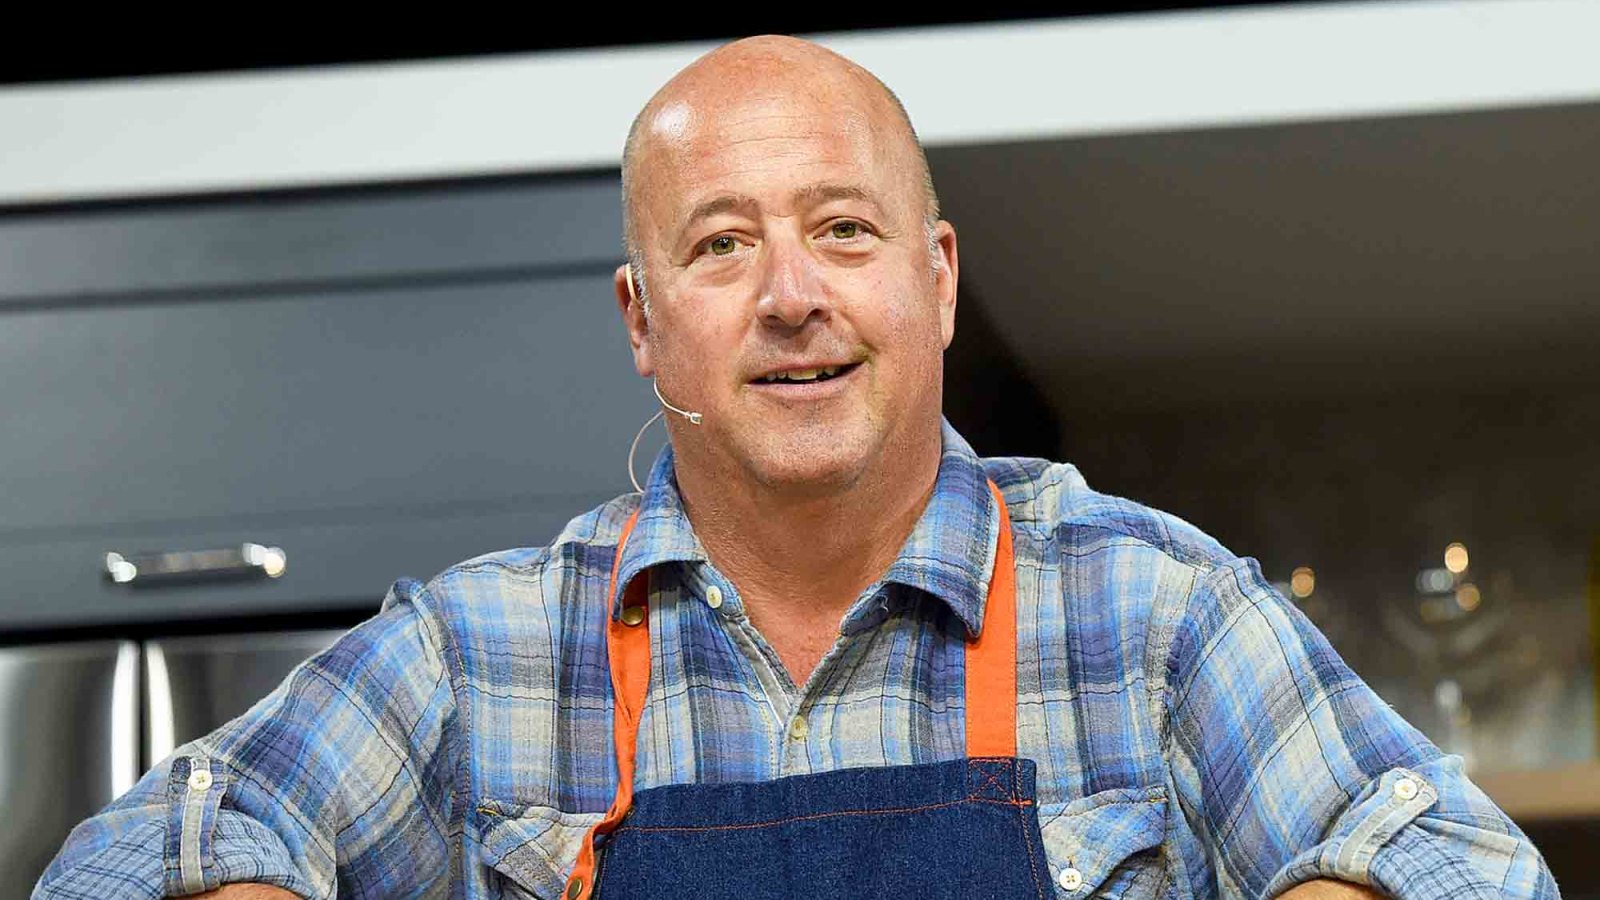 Chef Andrew Zimmern at the 2016 Food Network & Cooking Channel New York City Wine & Food Festival in New York City.